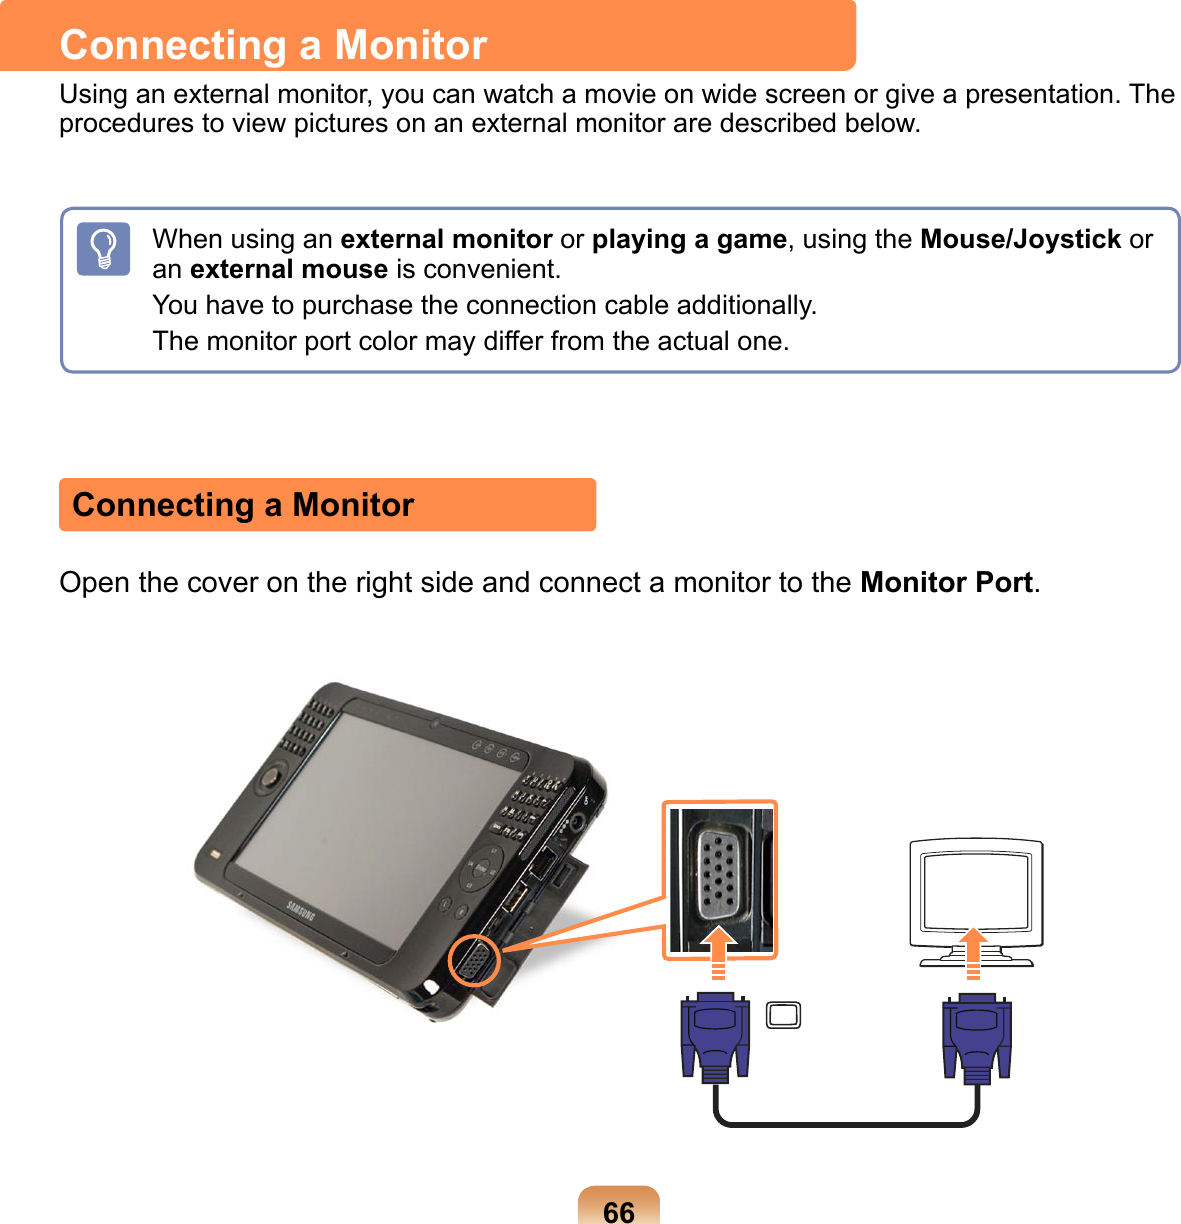 66Connecting a MonitorUsing an external monitor, you can watch a movie on wide screen or give a presentation. The procedures to view pictures on an external monitor are described below.When using an external monitor or playing a game, using the Mouse/Joystick or an external mouse is convenient.You have to purchase the connection cable additionally.The monitor port color may differ from the actual one.Connecting a MonitorOpen the cover on the right side and connect a monitor to the Monitor Port.